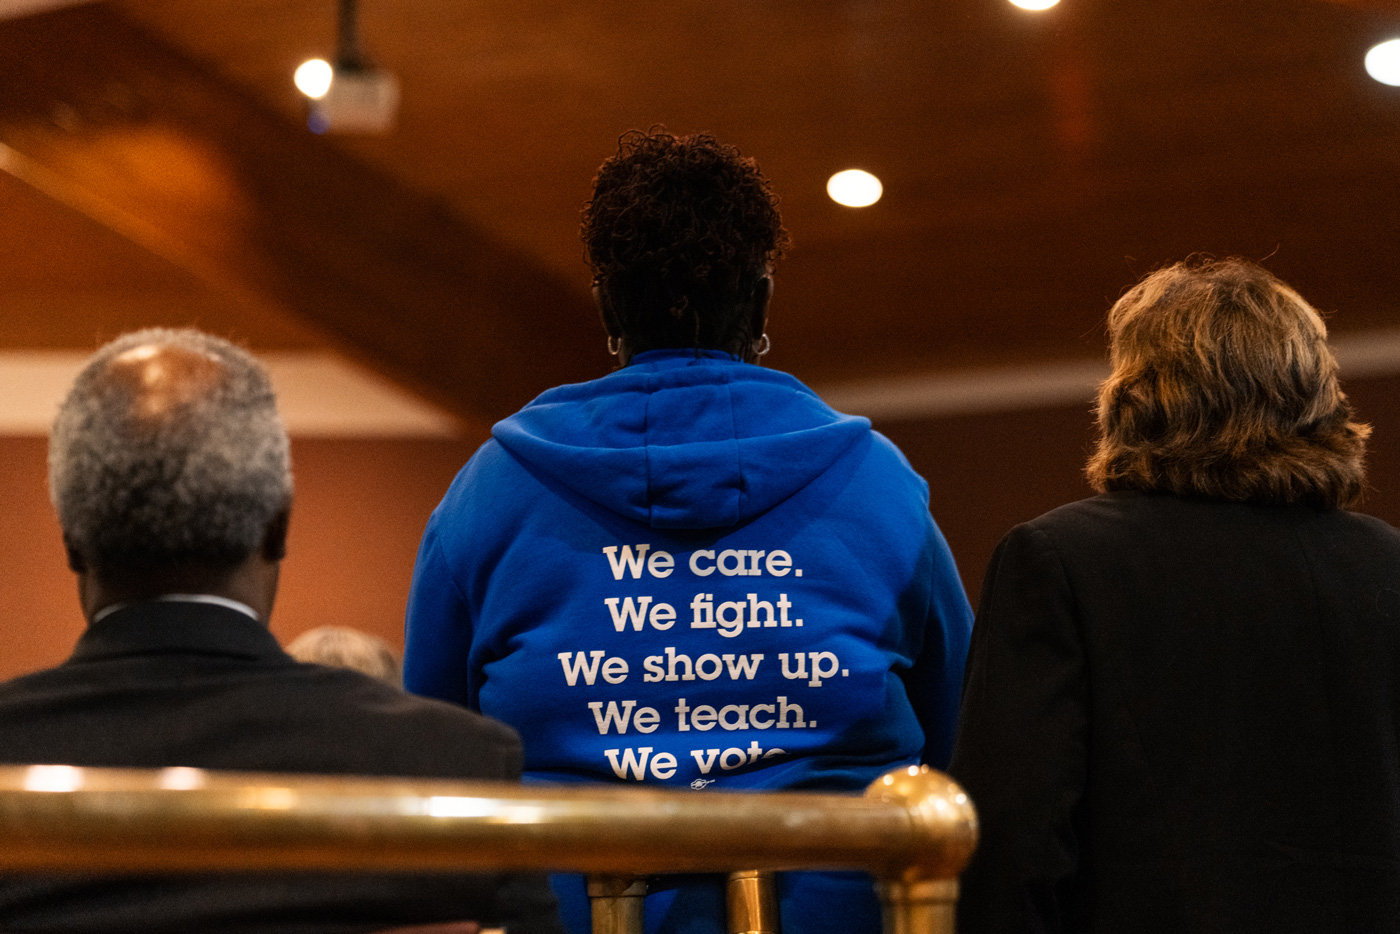 A woman’s jacket reads, “We care. We fight. We show up. We teach. We vote.”